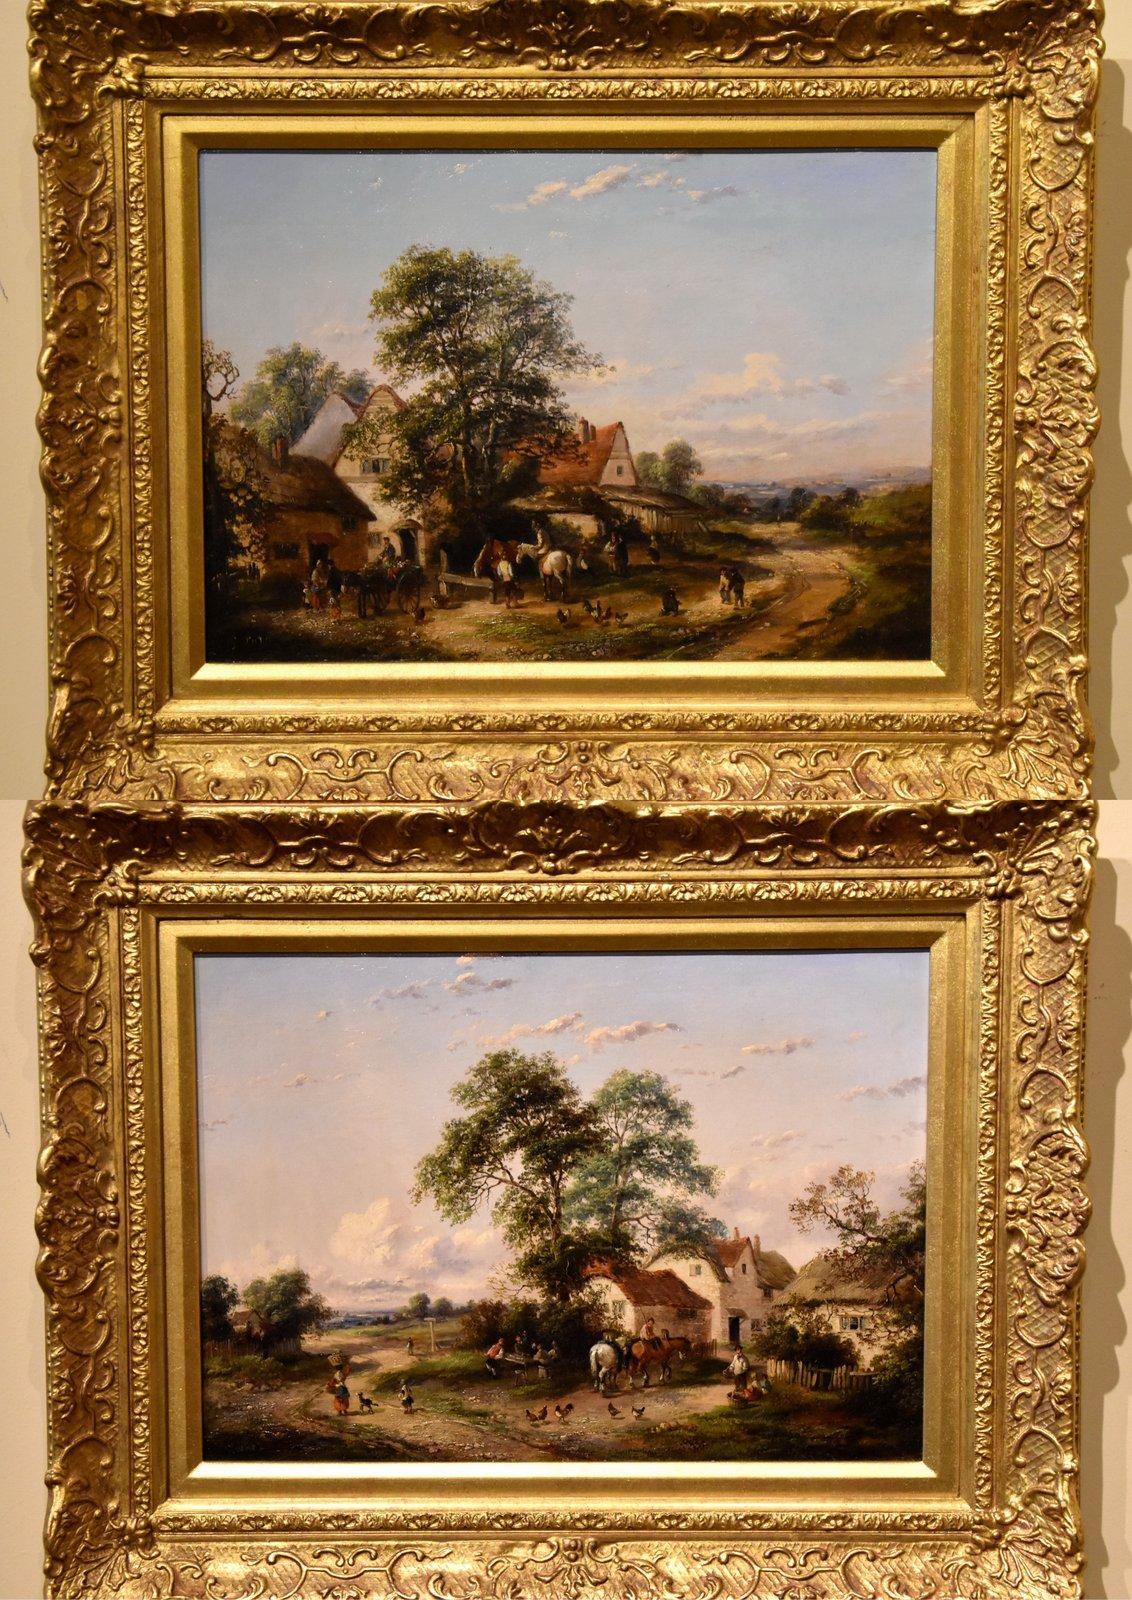 Oil Painting Pair by Georgina Lara " A Busy Village Scene" who flourished  1862- 1871 Fine quality painter of domestic village views. She exhibited at the Royal Society of British artists and the British Institution. Both Oil on canvas .

Dimensions